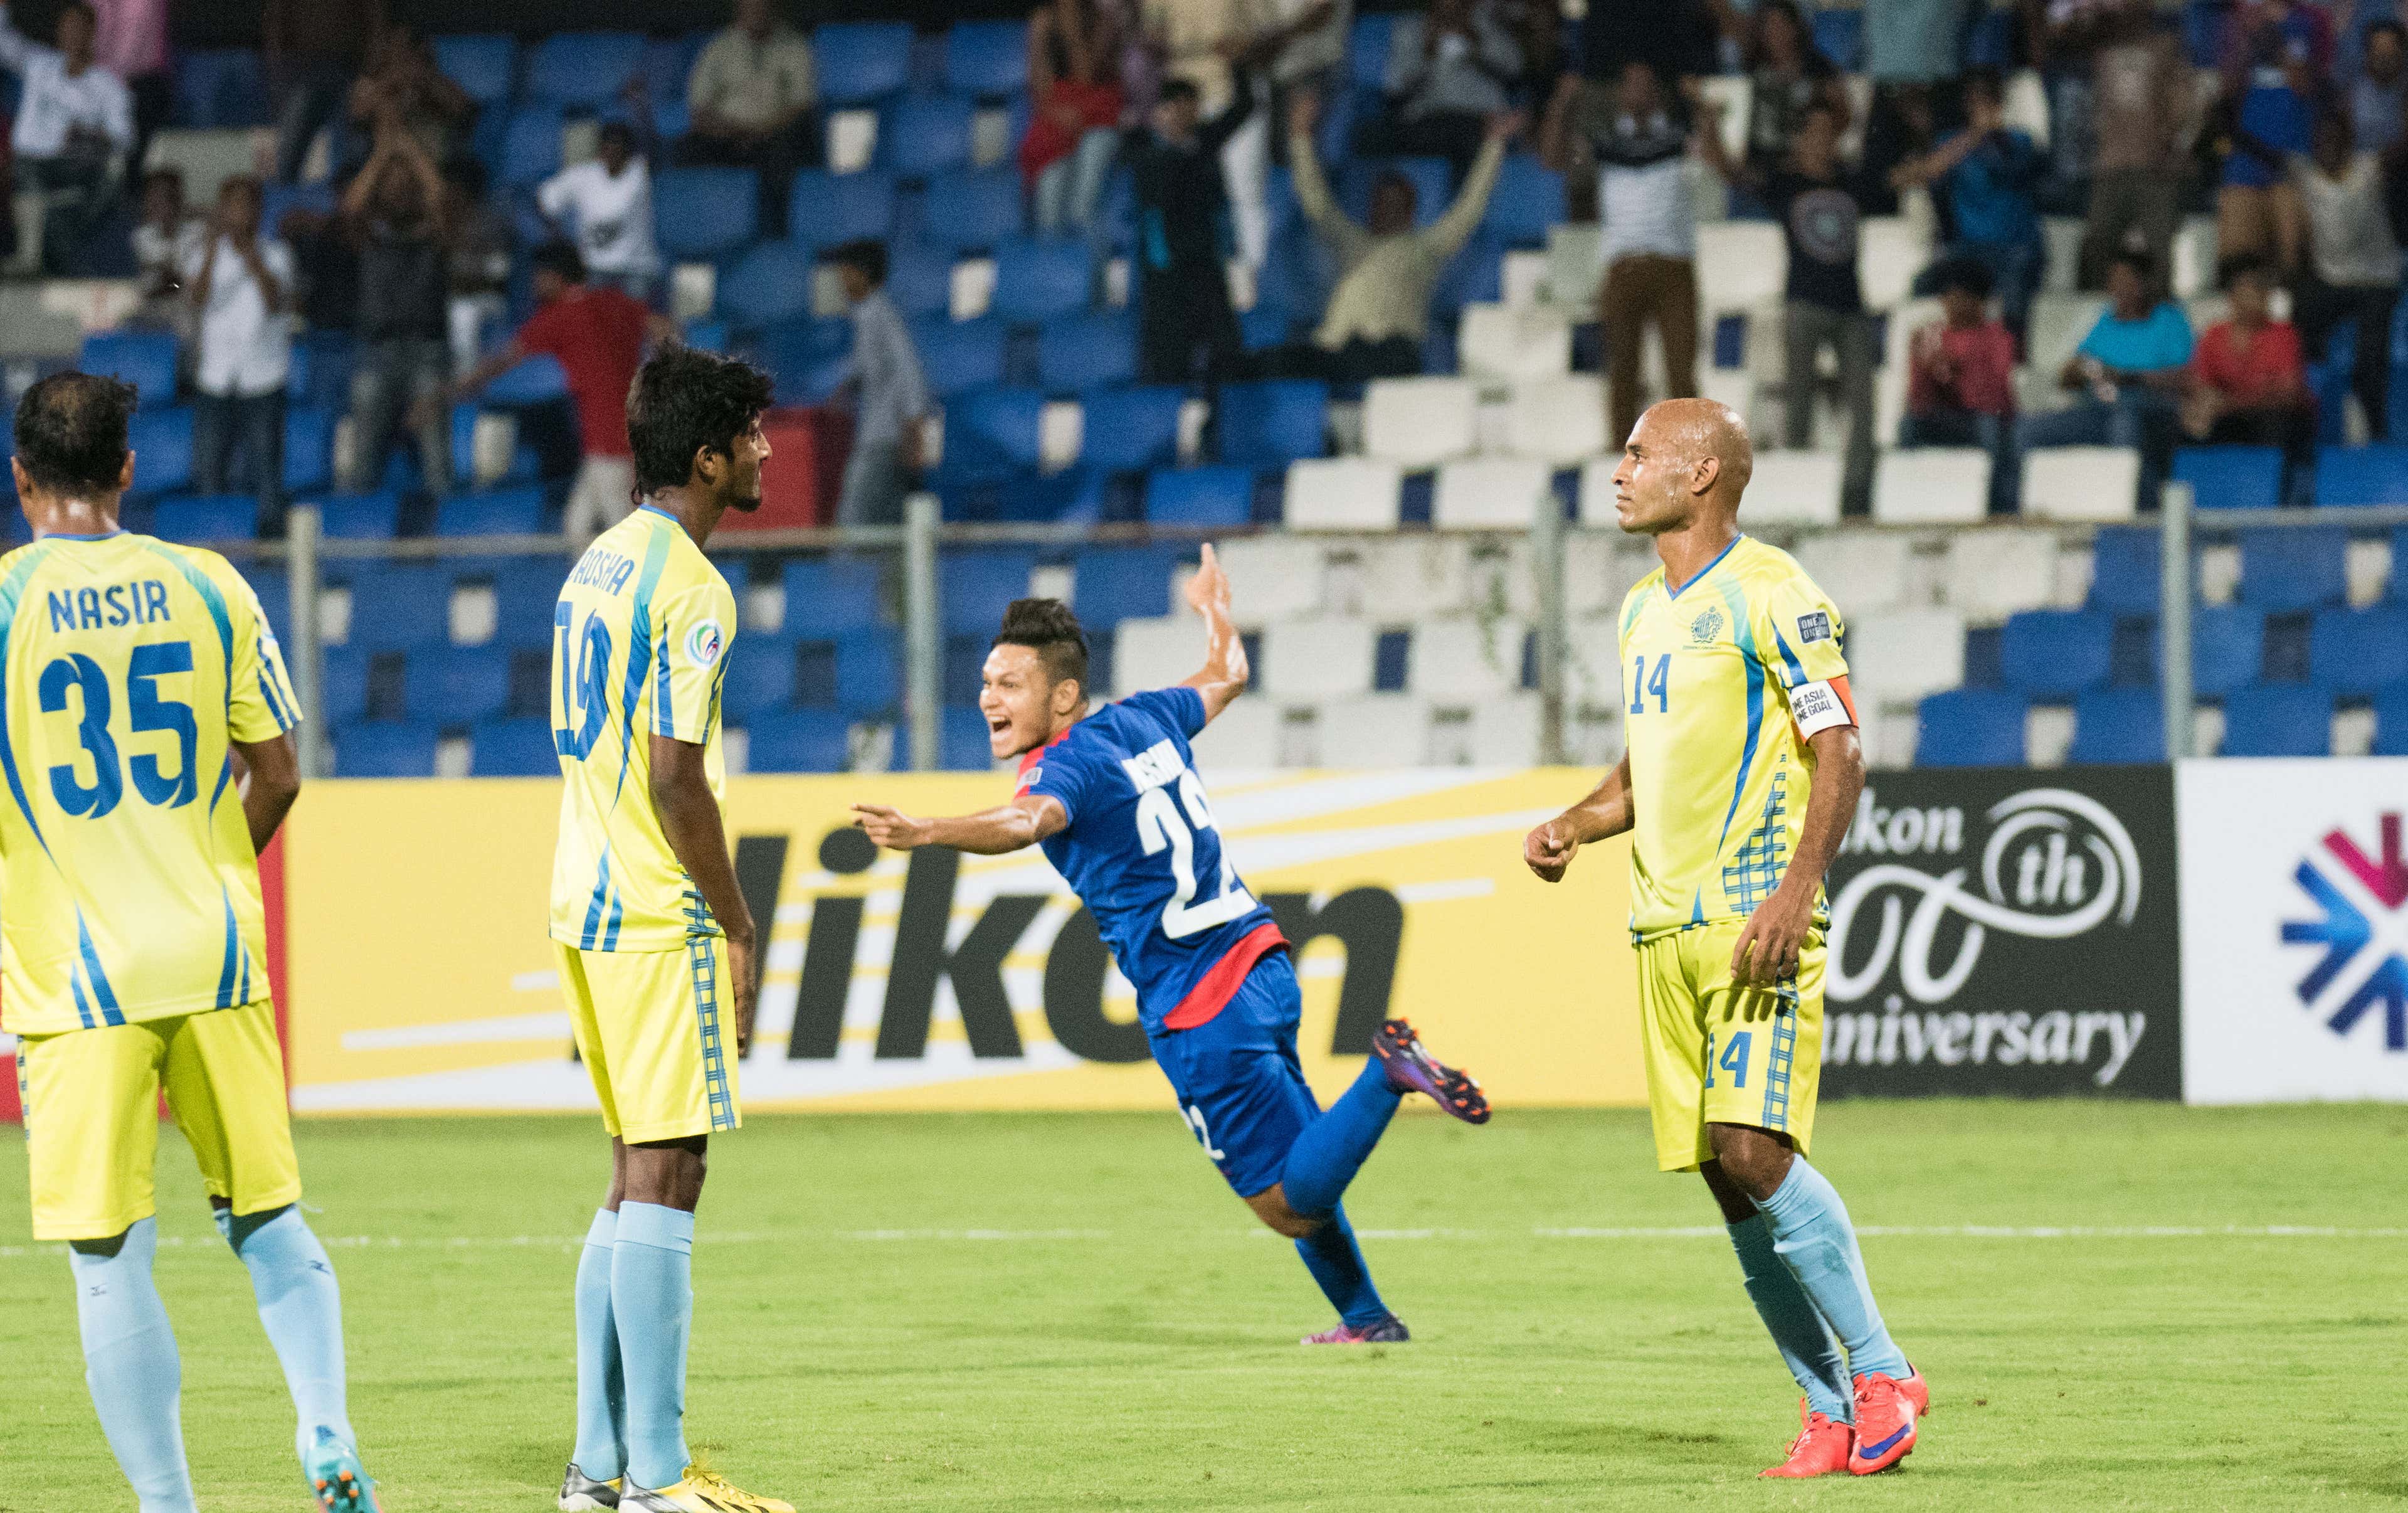 Action from the match between Bengaluru FC and Abahani Limited Dhaka at the Kanteerava Stadium, in Bengaluru, on Tuesday.